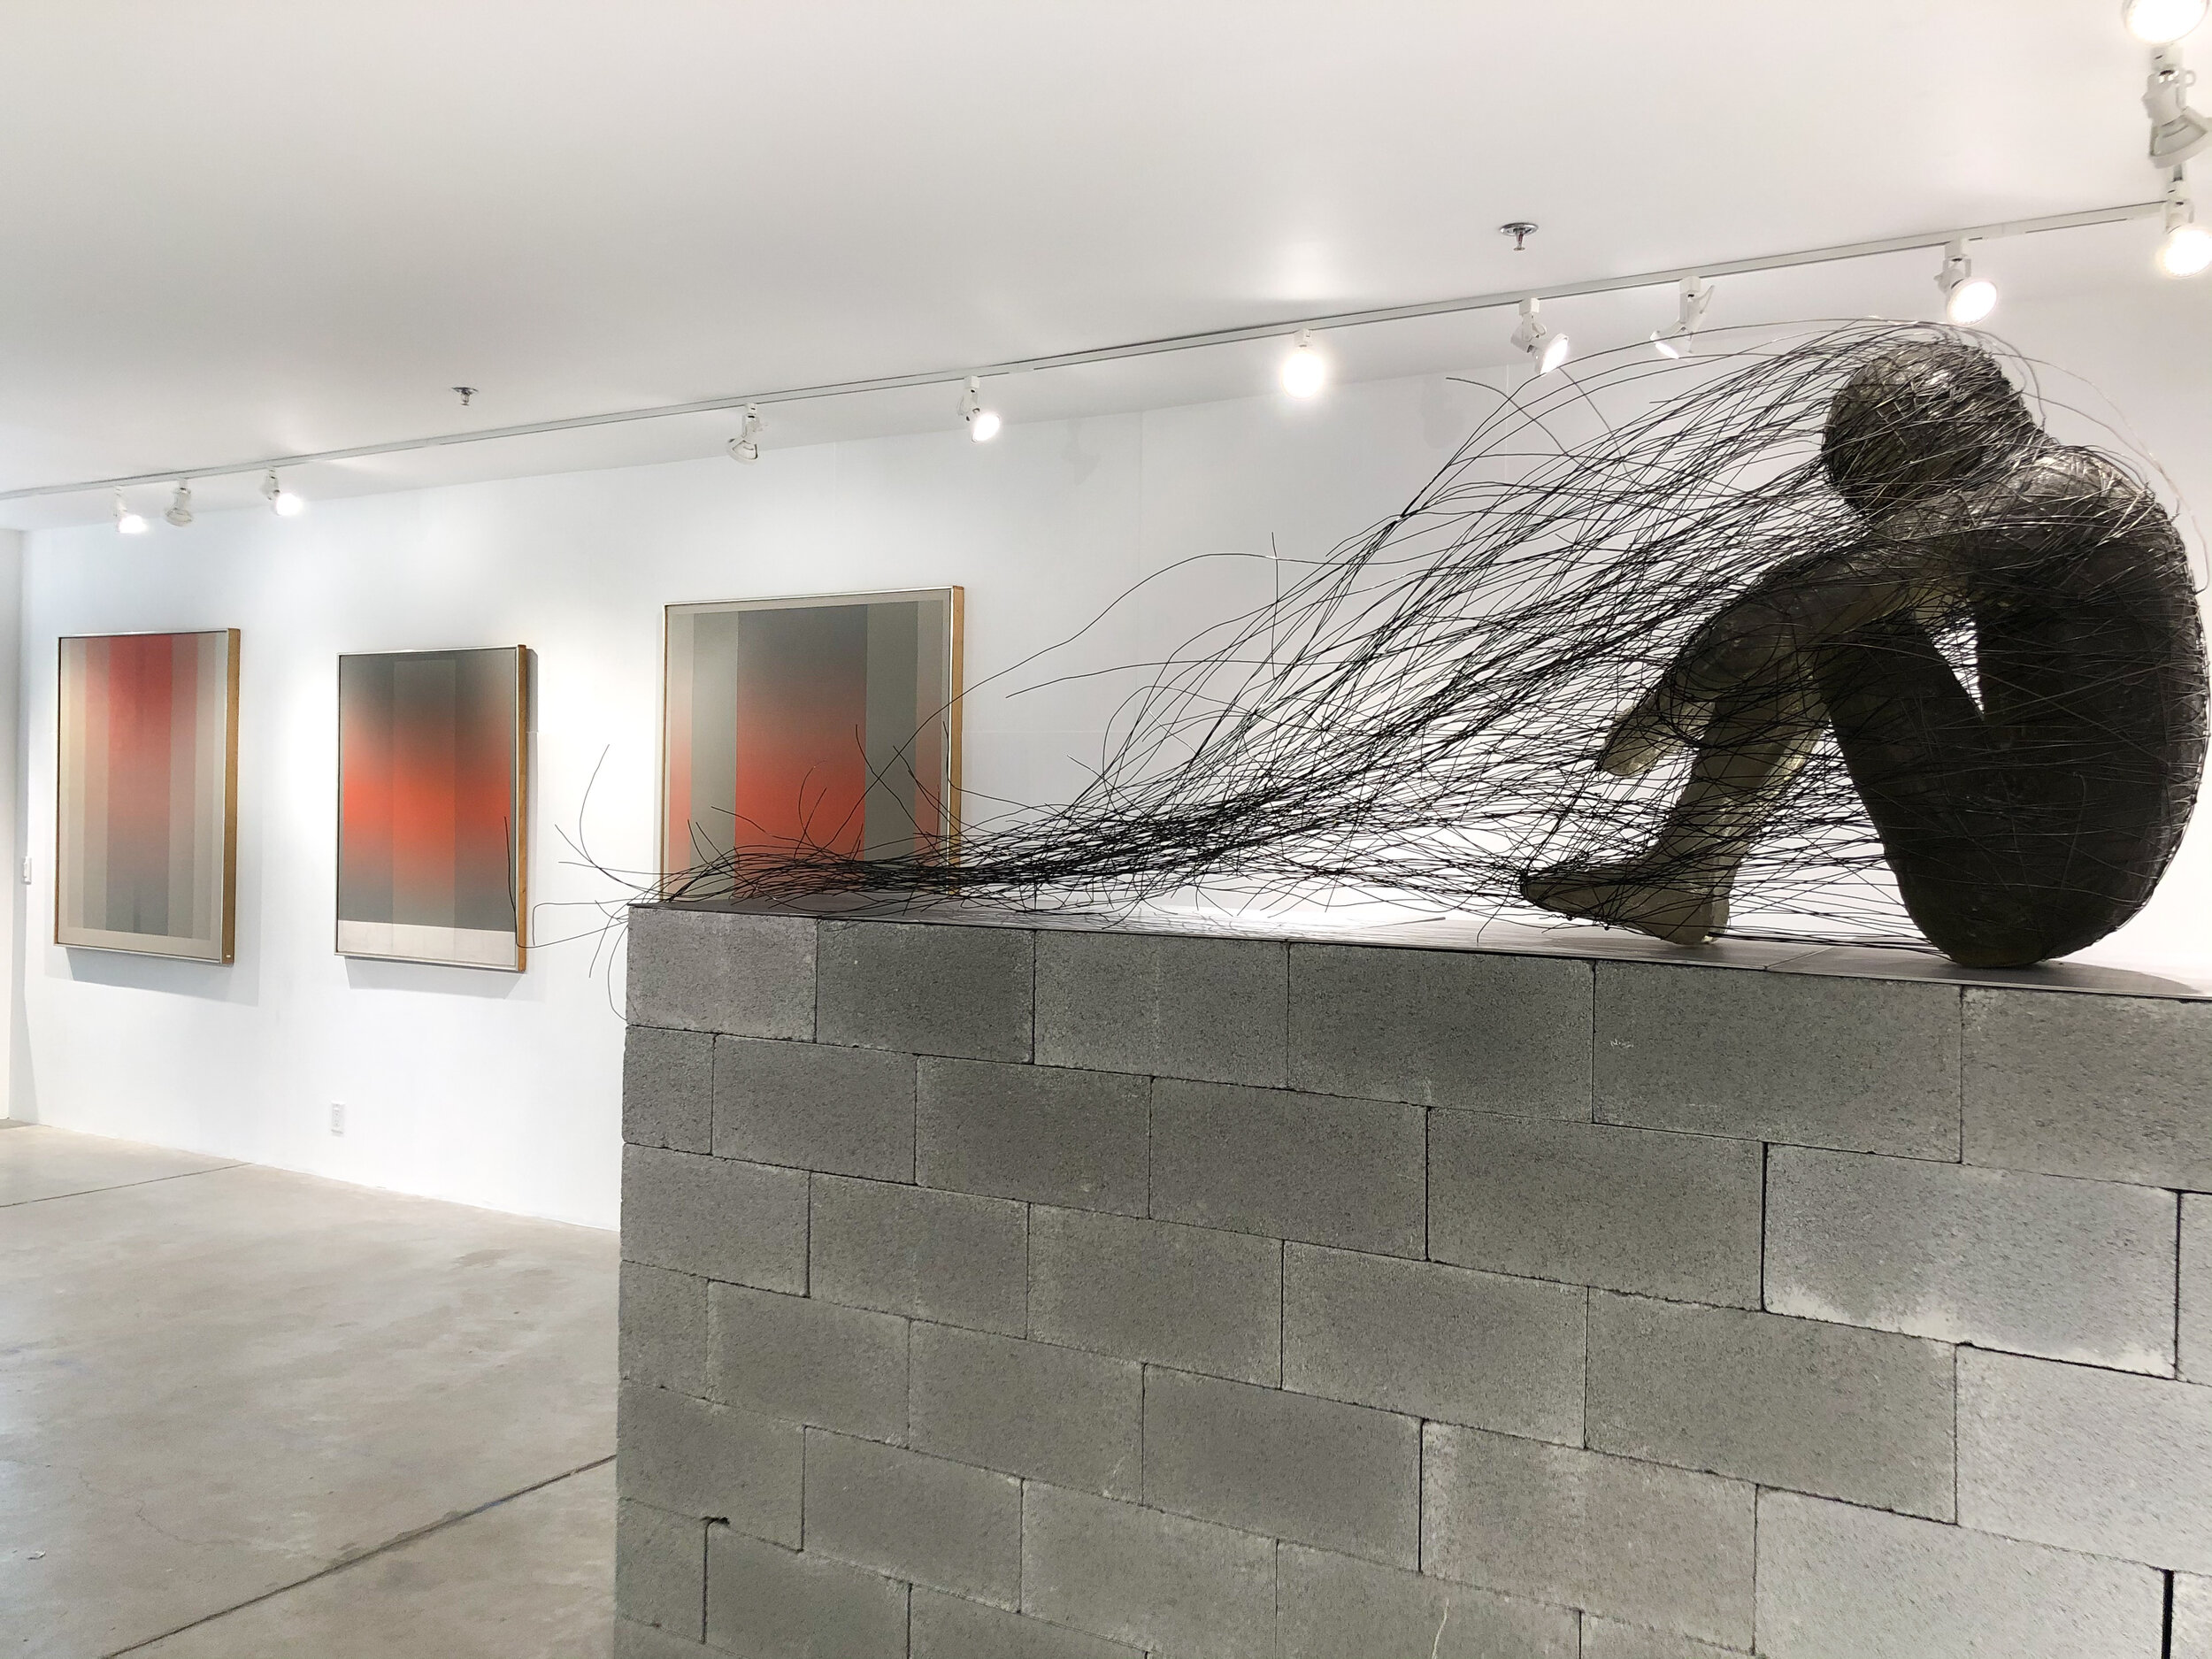 Installation view: John Day paintings (background, left); Nathaniel Price sculpture (foreground, right)